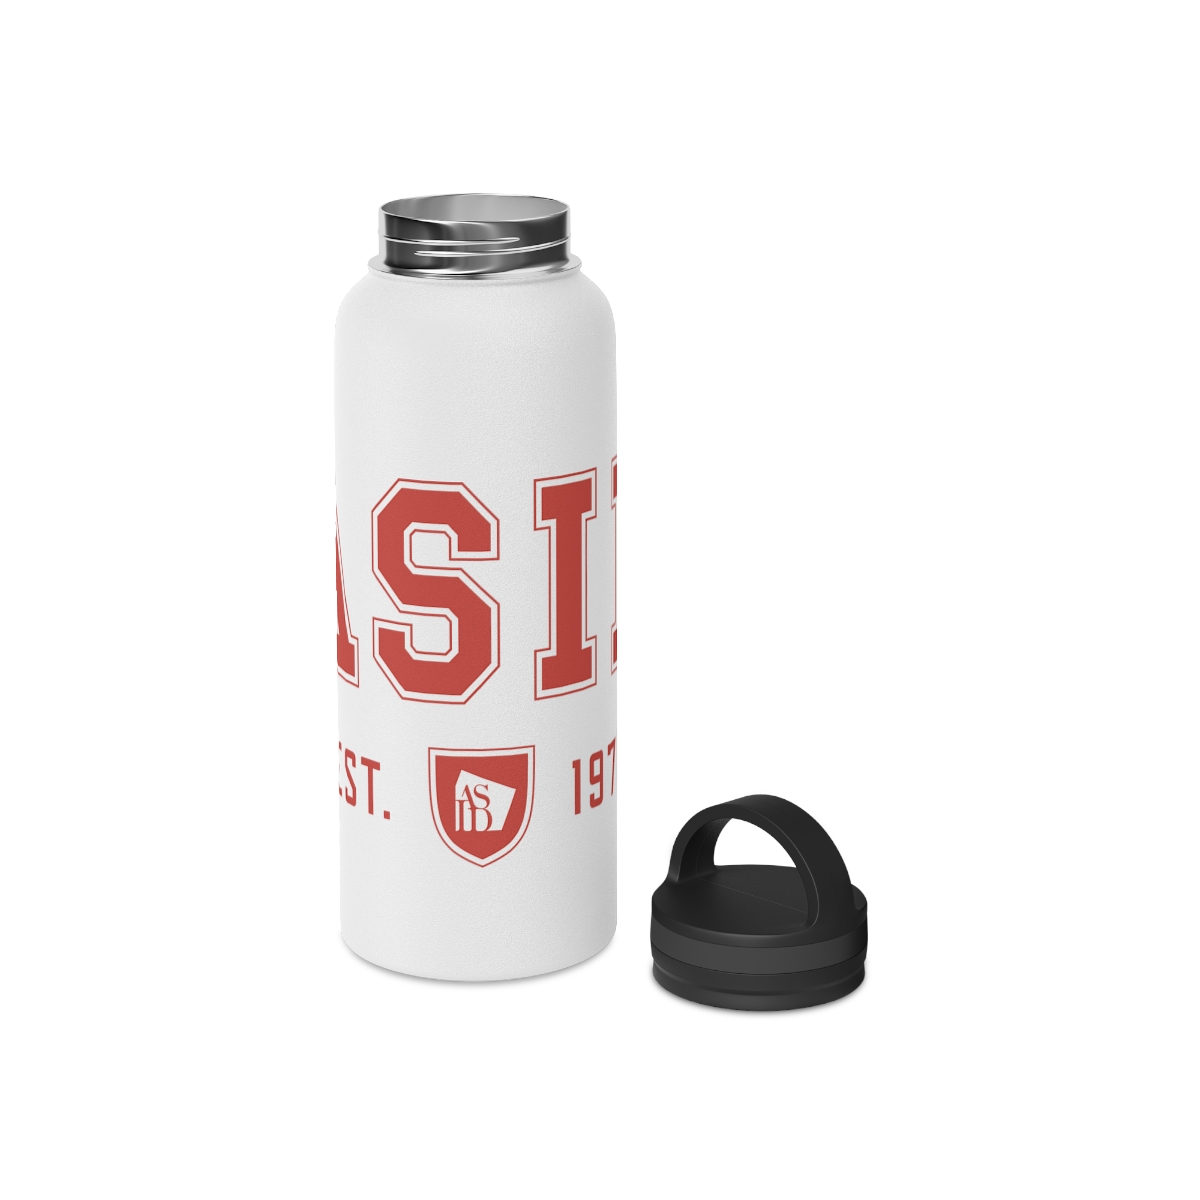 ASID LIMITED EDITION 1975 Stainless Steel Water Bottle, Handle Lid product thumbnail image